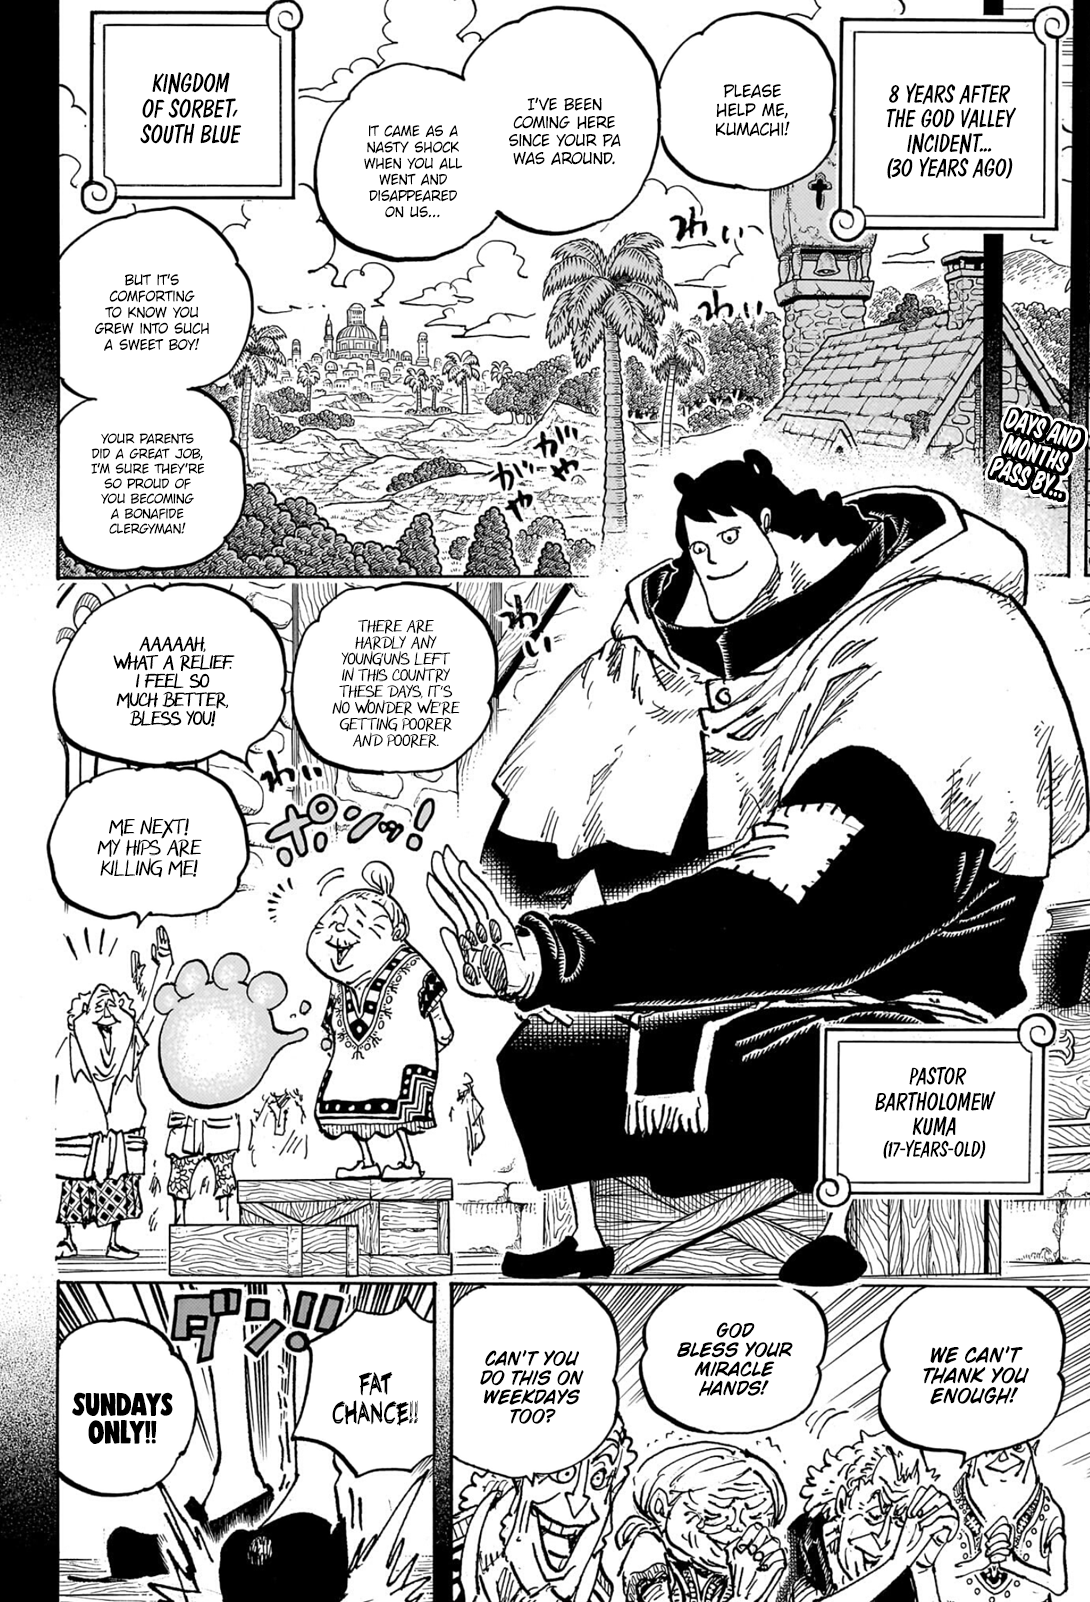 One Piece: Chapter 1057 - Theories and Discussion : r/OnePiece